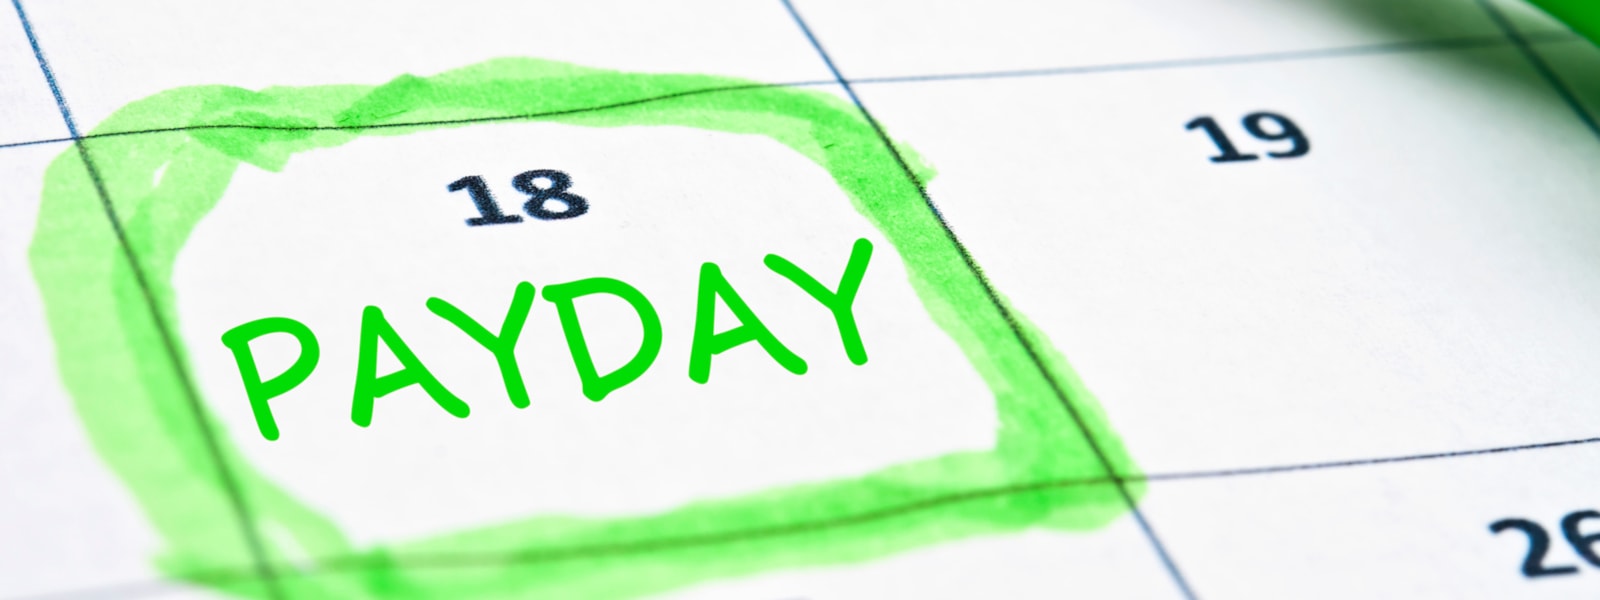 calendar with payday written on it in green